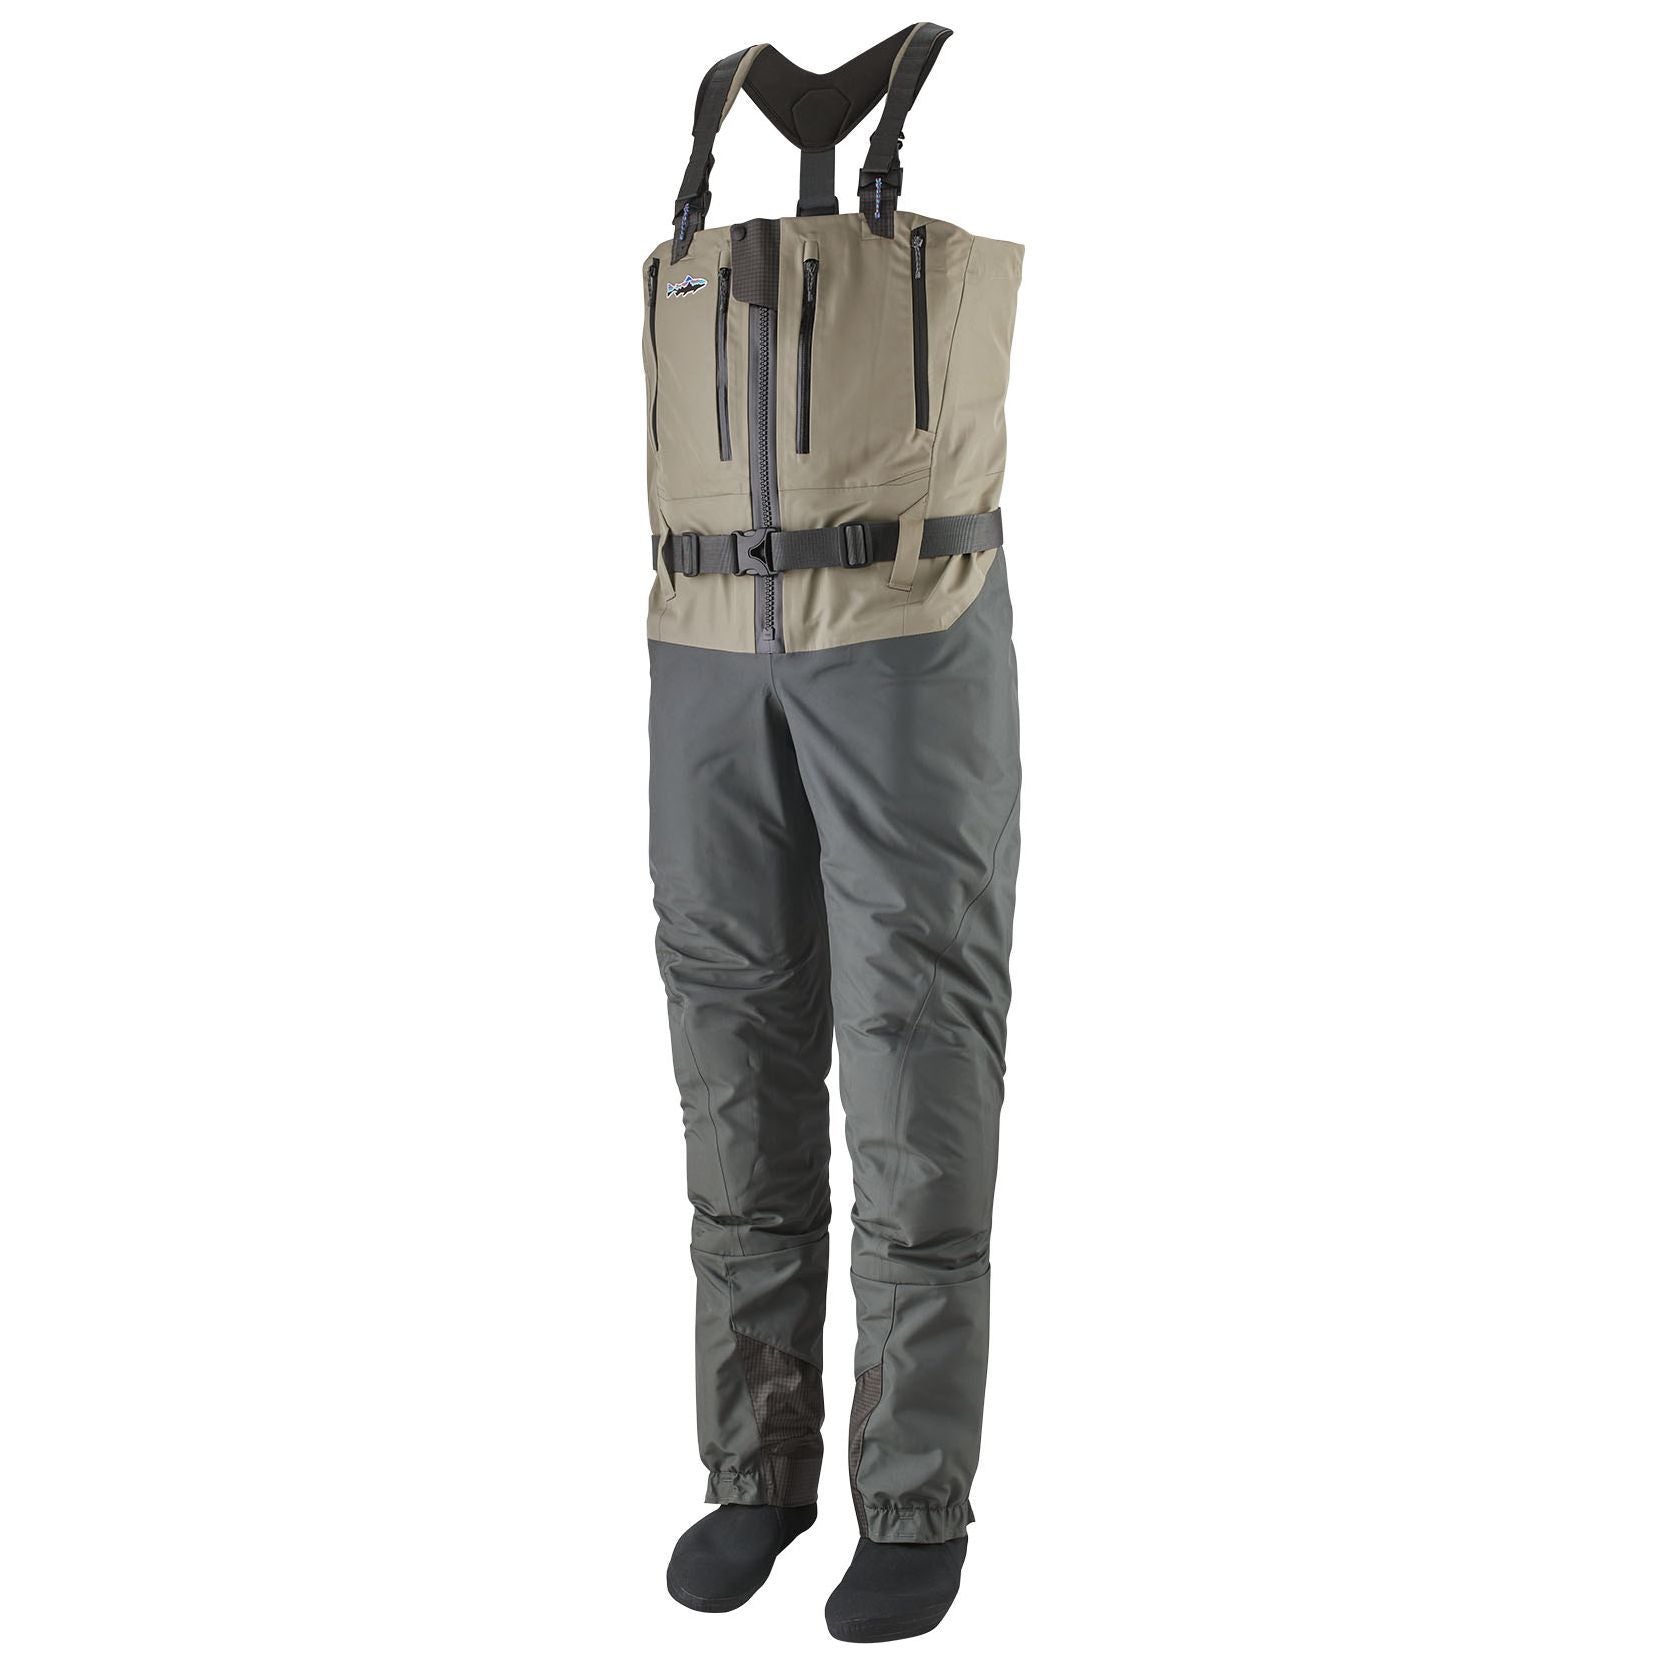 Patagonia Men's Swiftcurrent Expedition Zip Front Waders River Rock Green 01